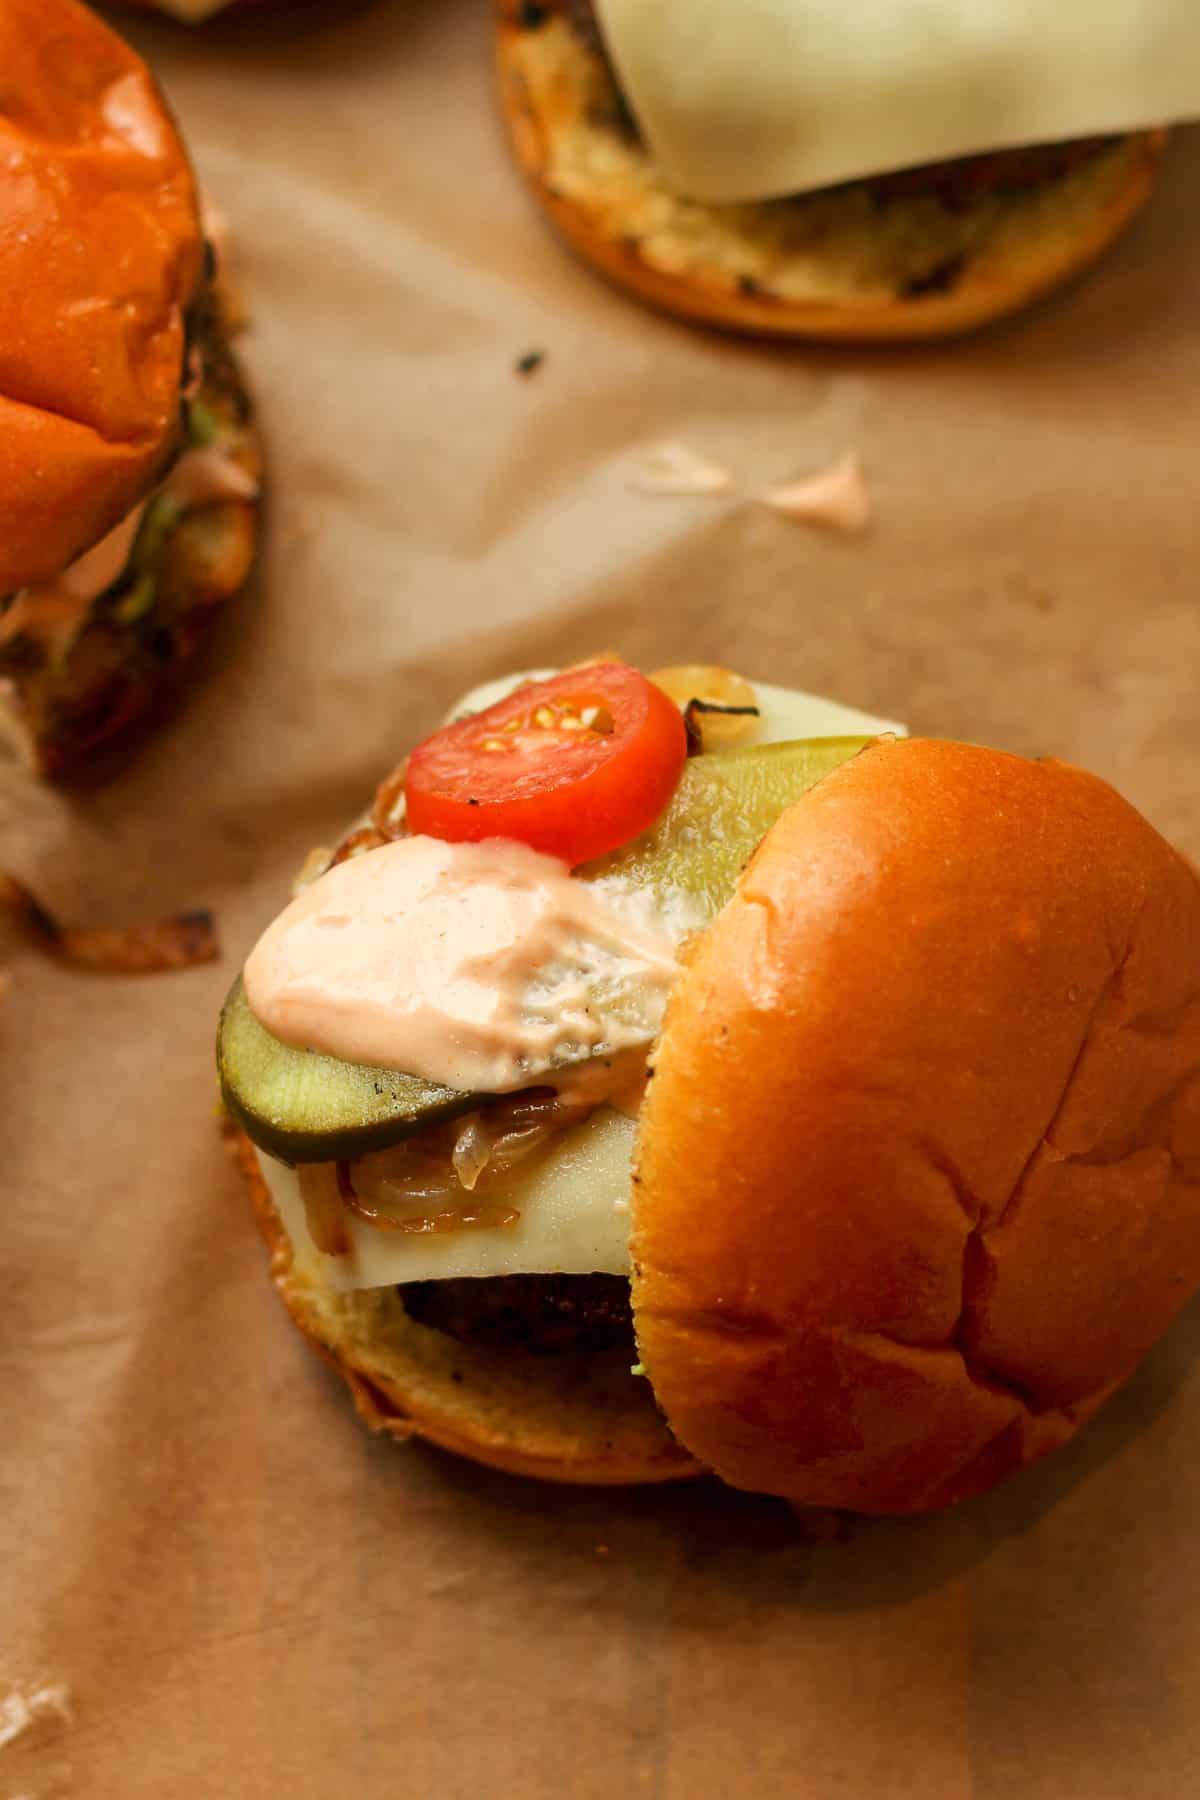 Overhead view of a burger with toppings.